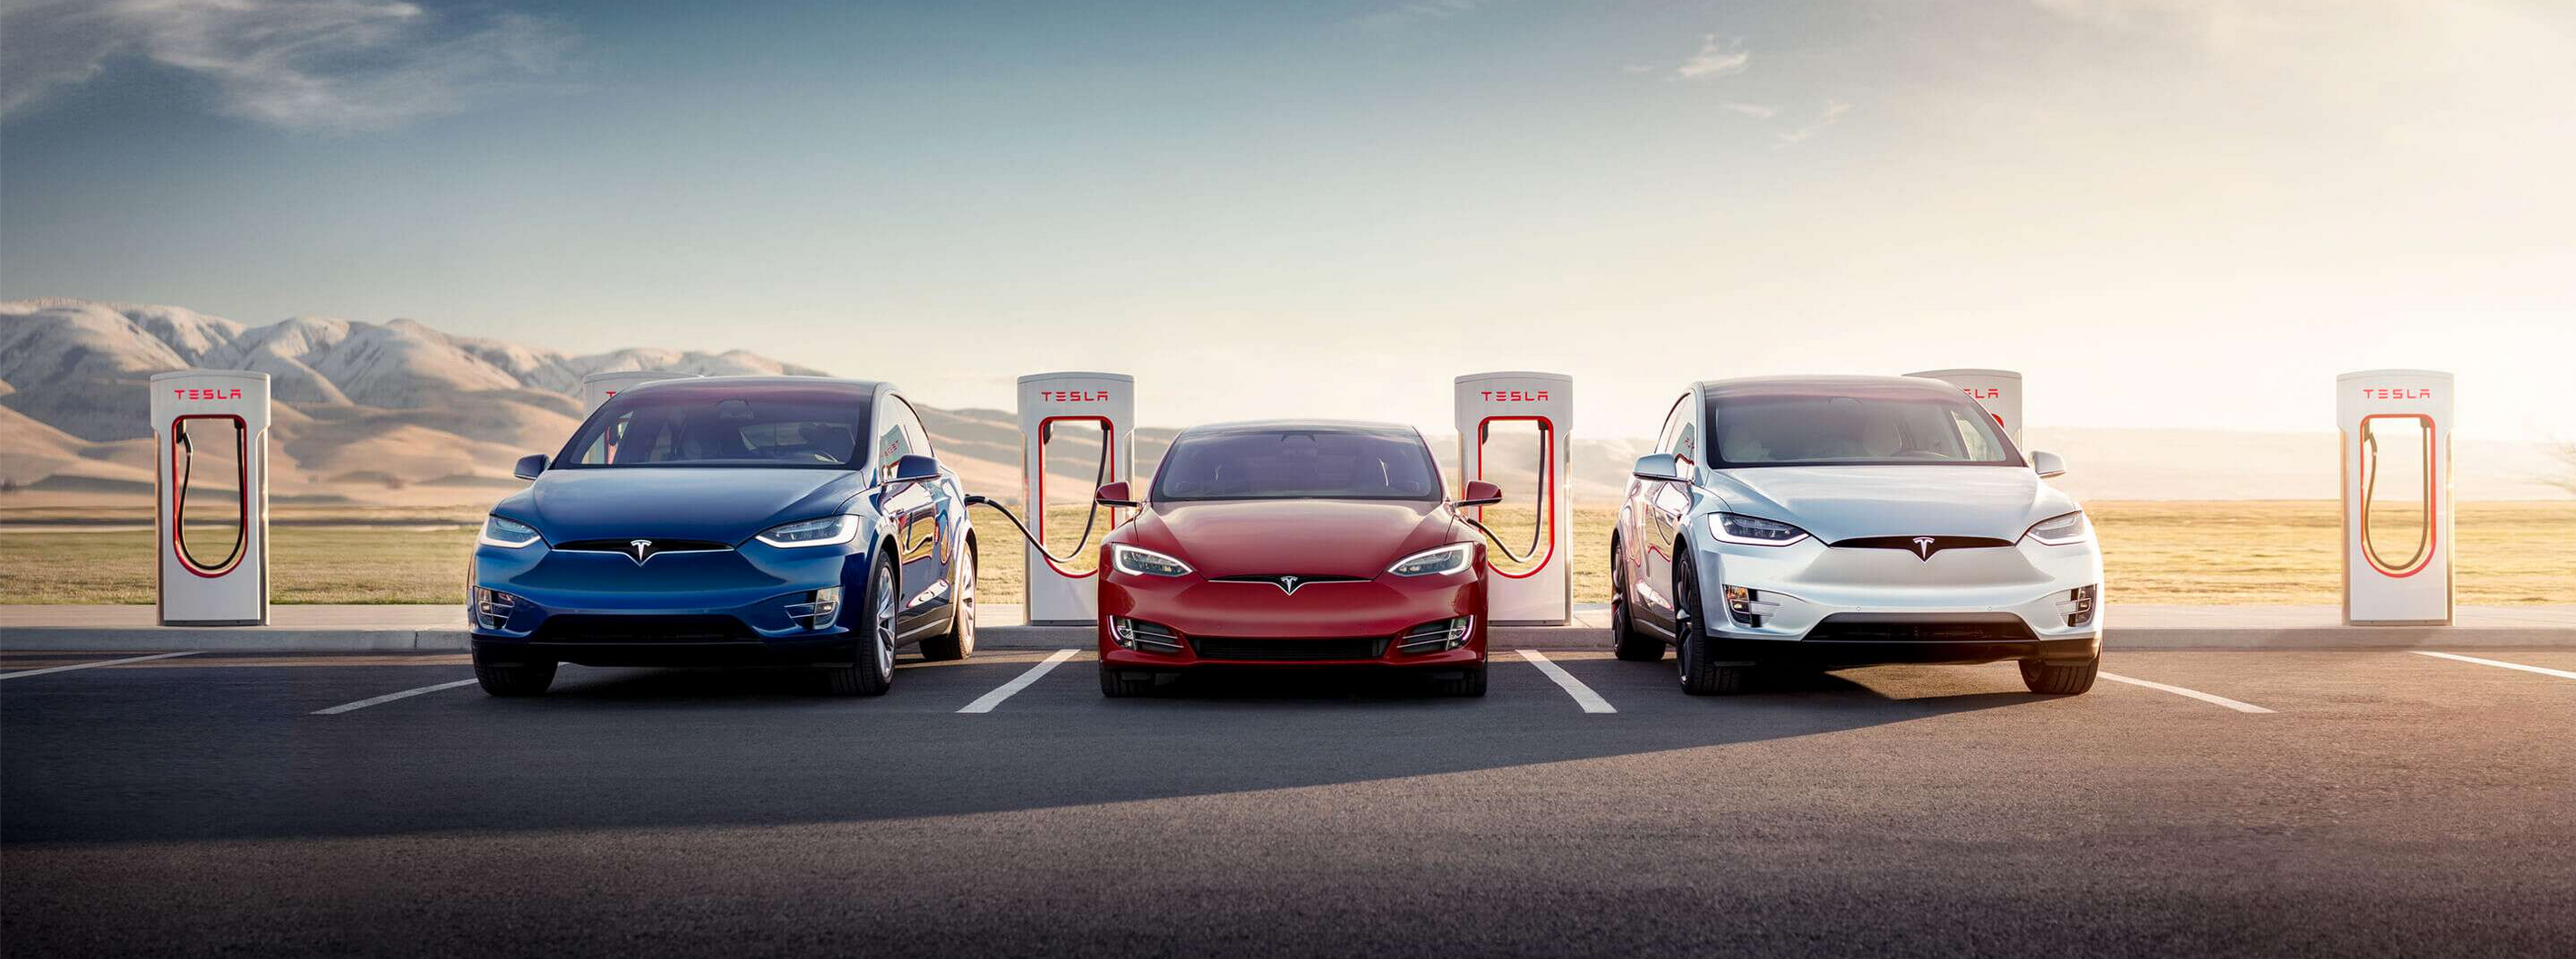 Musk tweeted that the V3 Supercharger will increase from 250 kW to 300 kW.